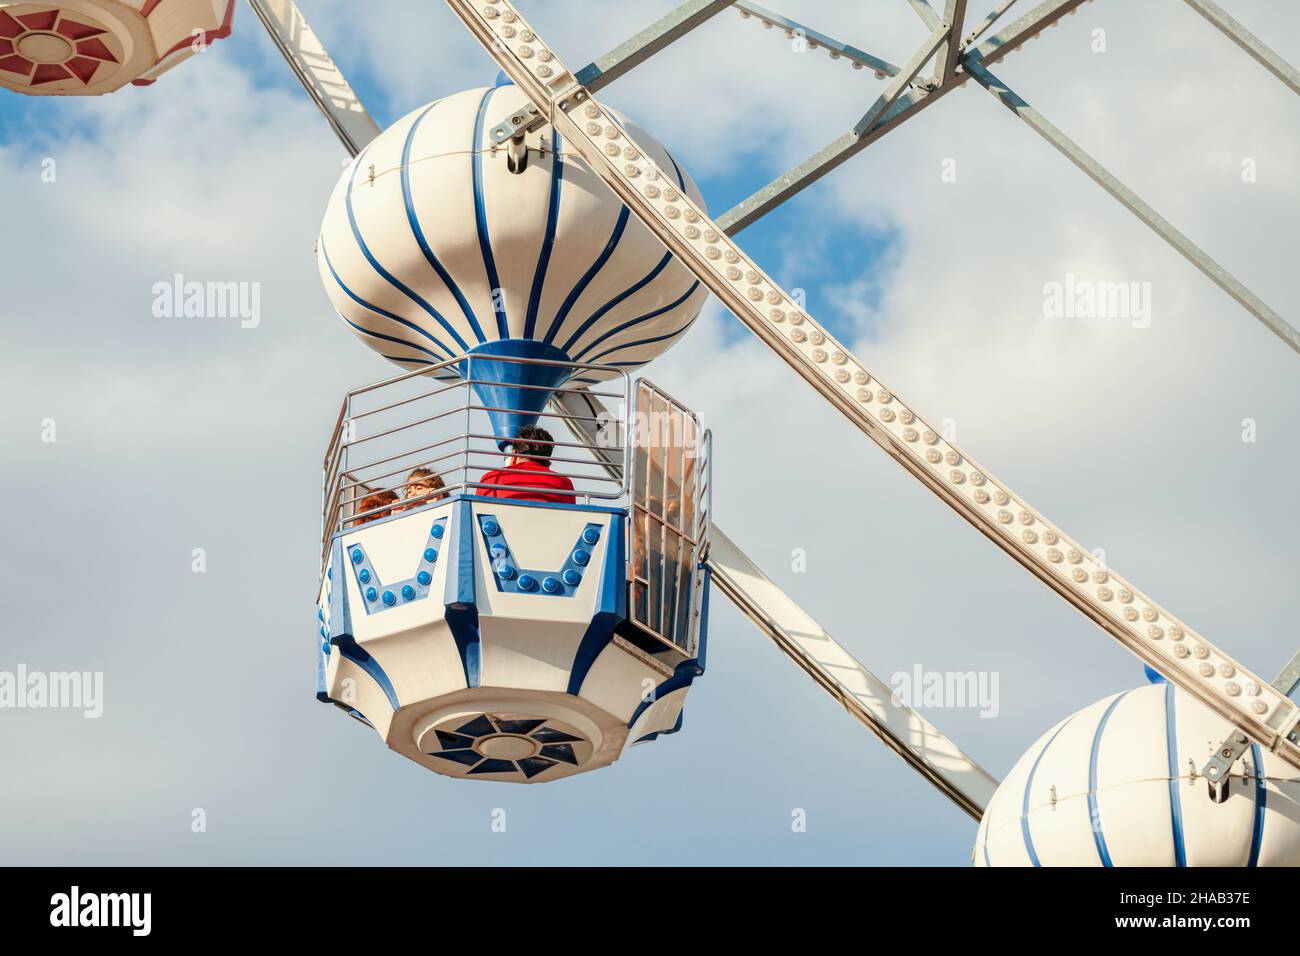 Ankara-Turkey:October 3, 2021: Happy excited cute little girl enjoying the view from ferris wheel in amusement park at luna park | Genclik Parki in An Stock Photo